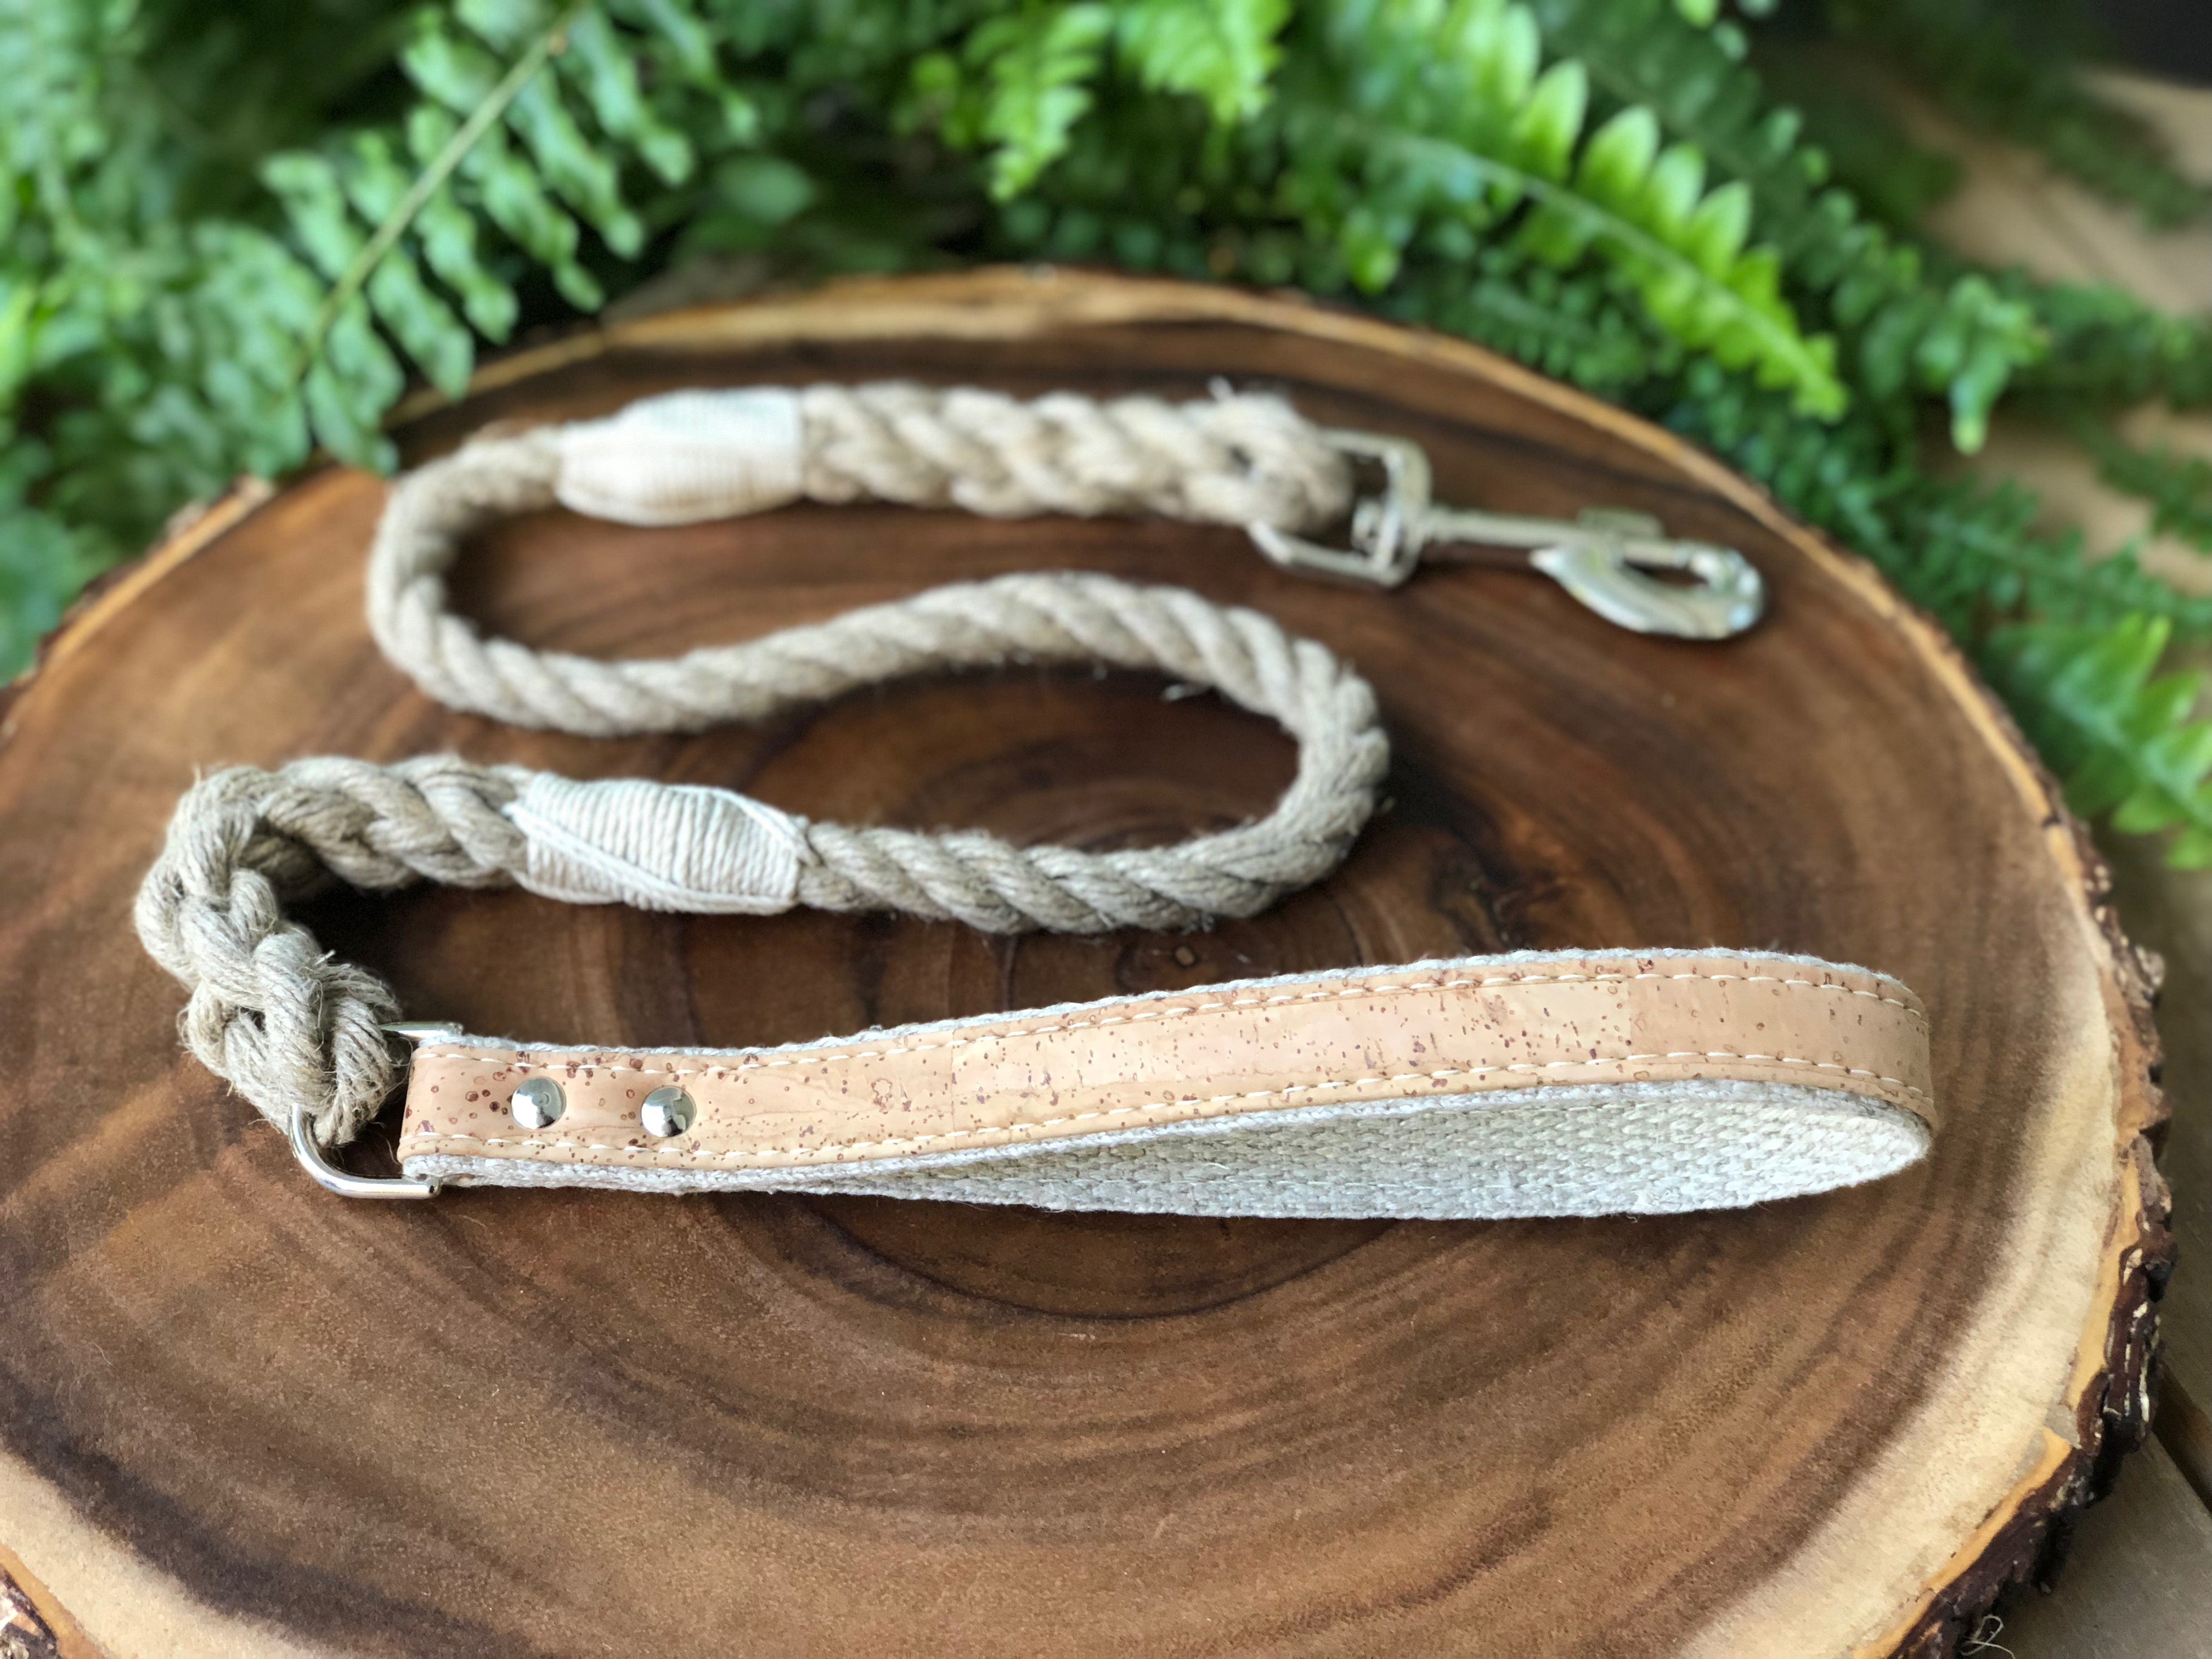 Hemp Rope Dog Leash with Natural Cork Leather Handle